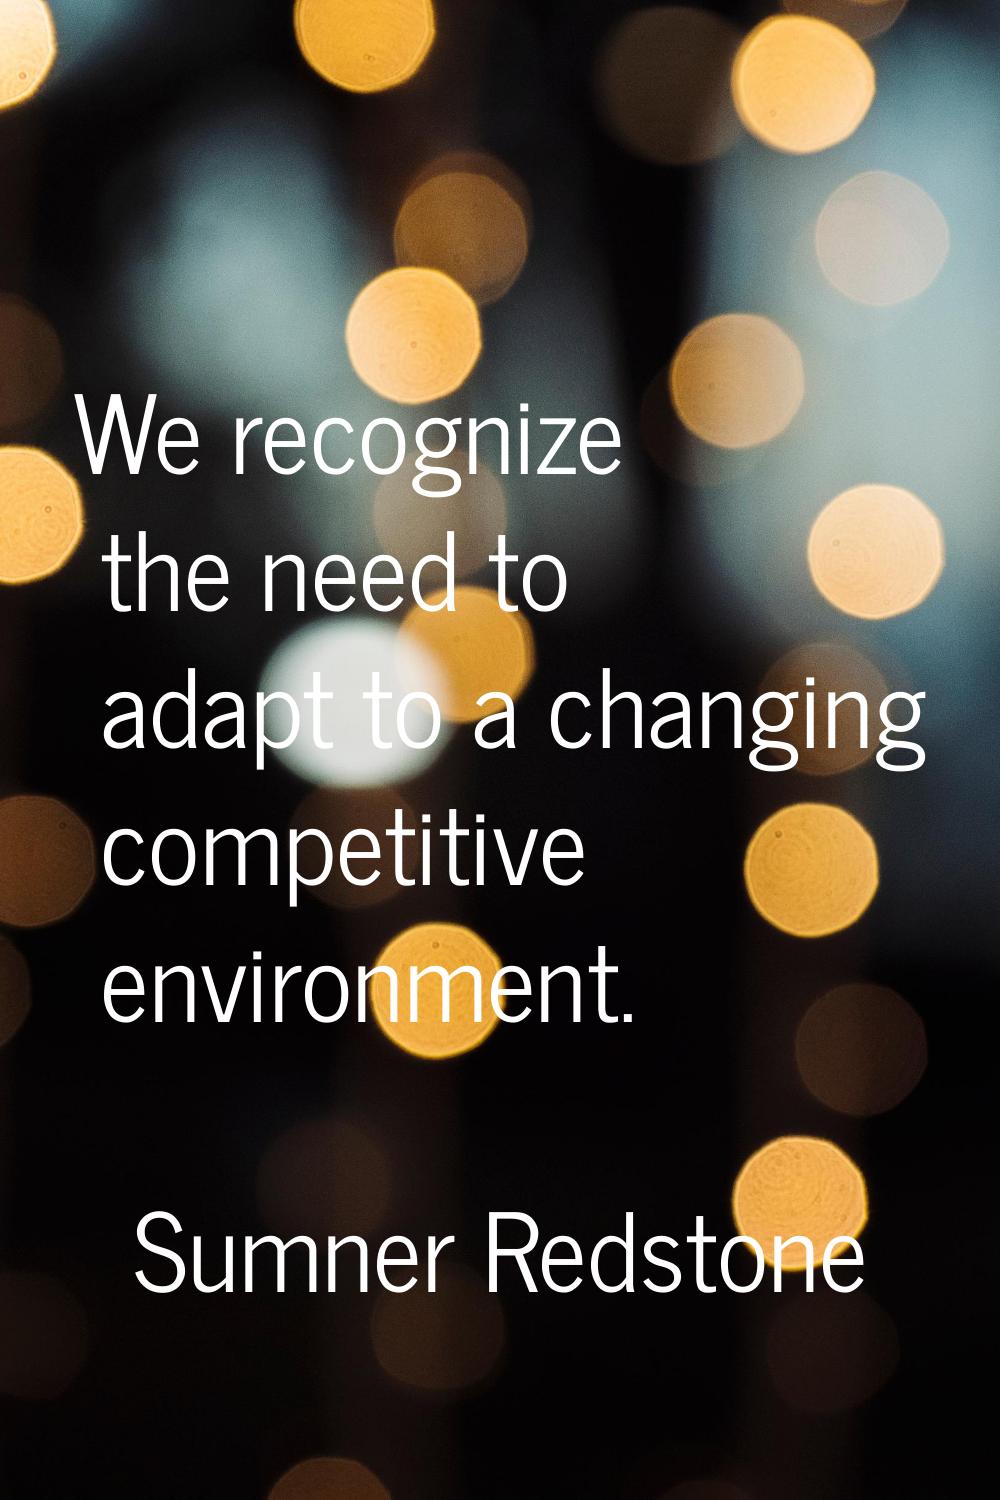 We recognize the need to adapt to a changing competitive environment.